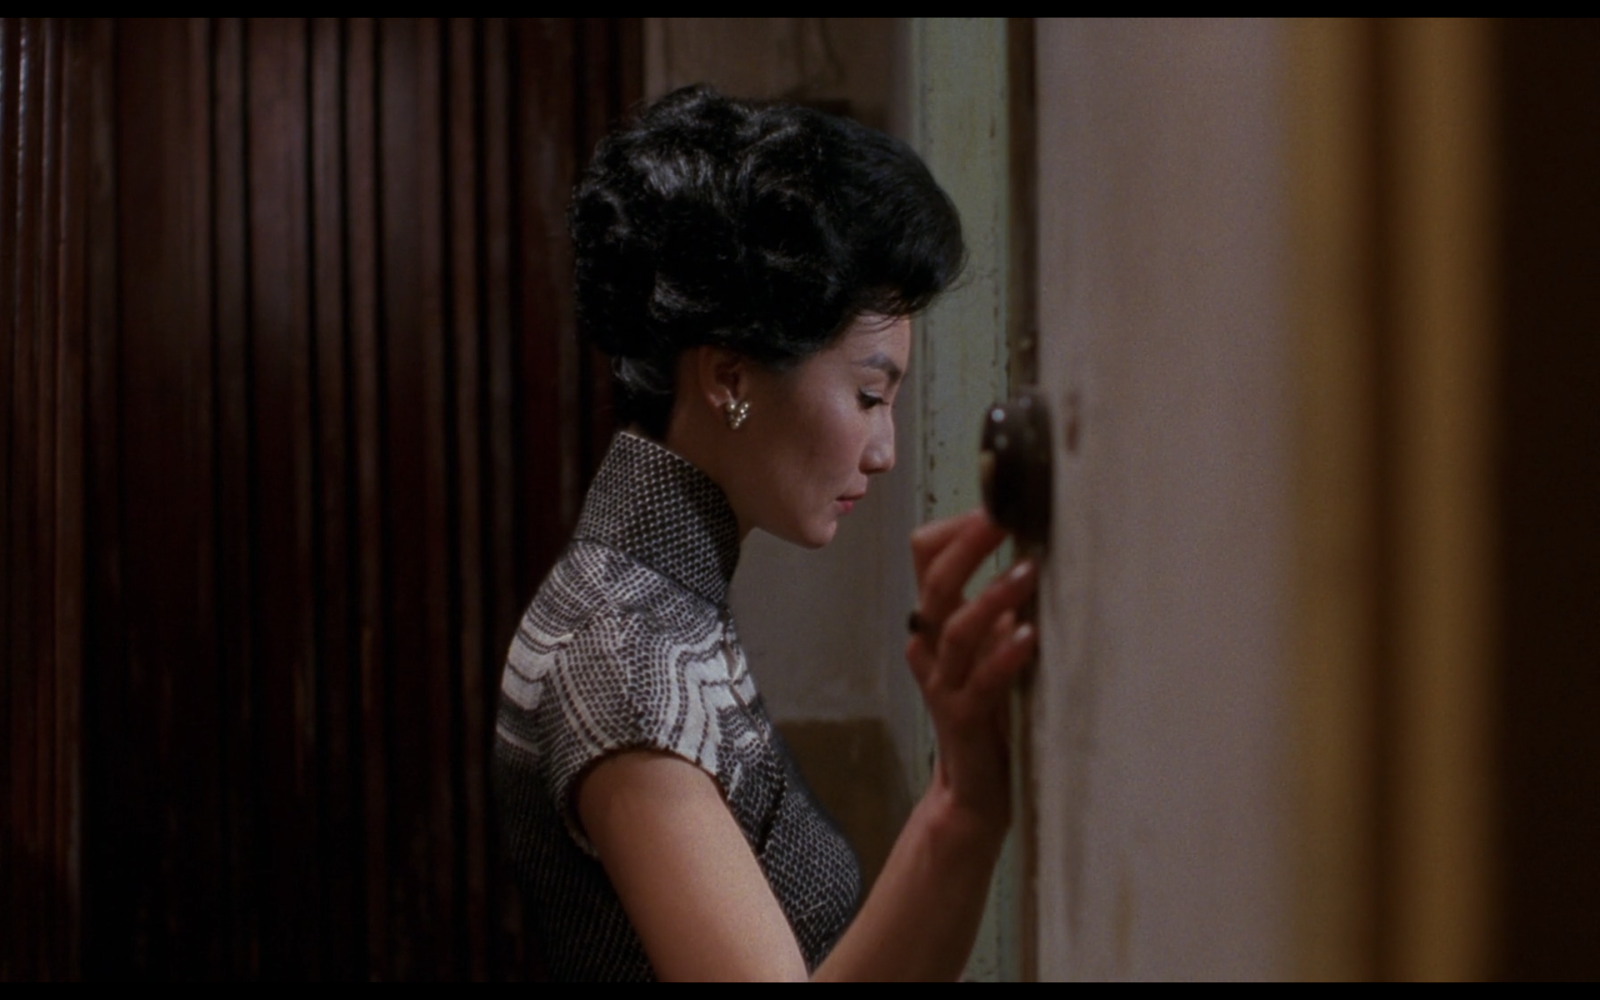 A screen still from the film In the Mood for Love, featuring Mrs. Chan as she enters a doorway into a room we cannot see.